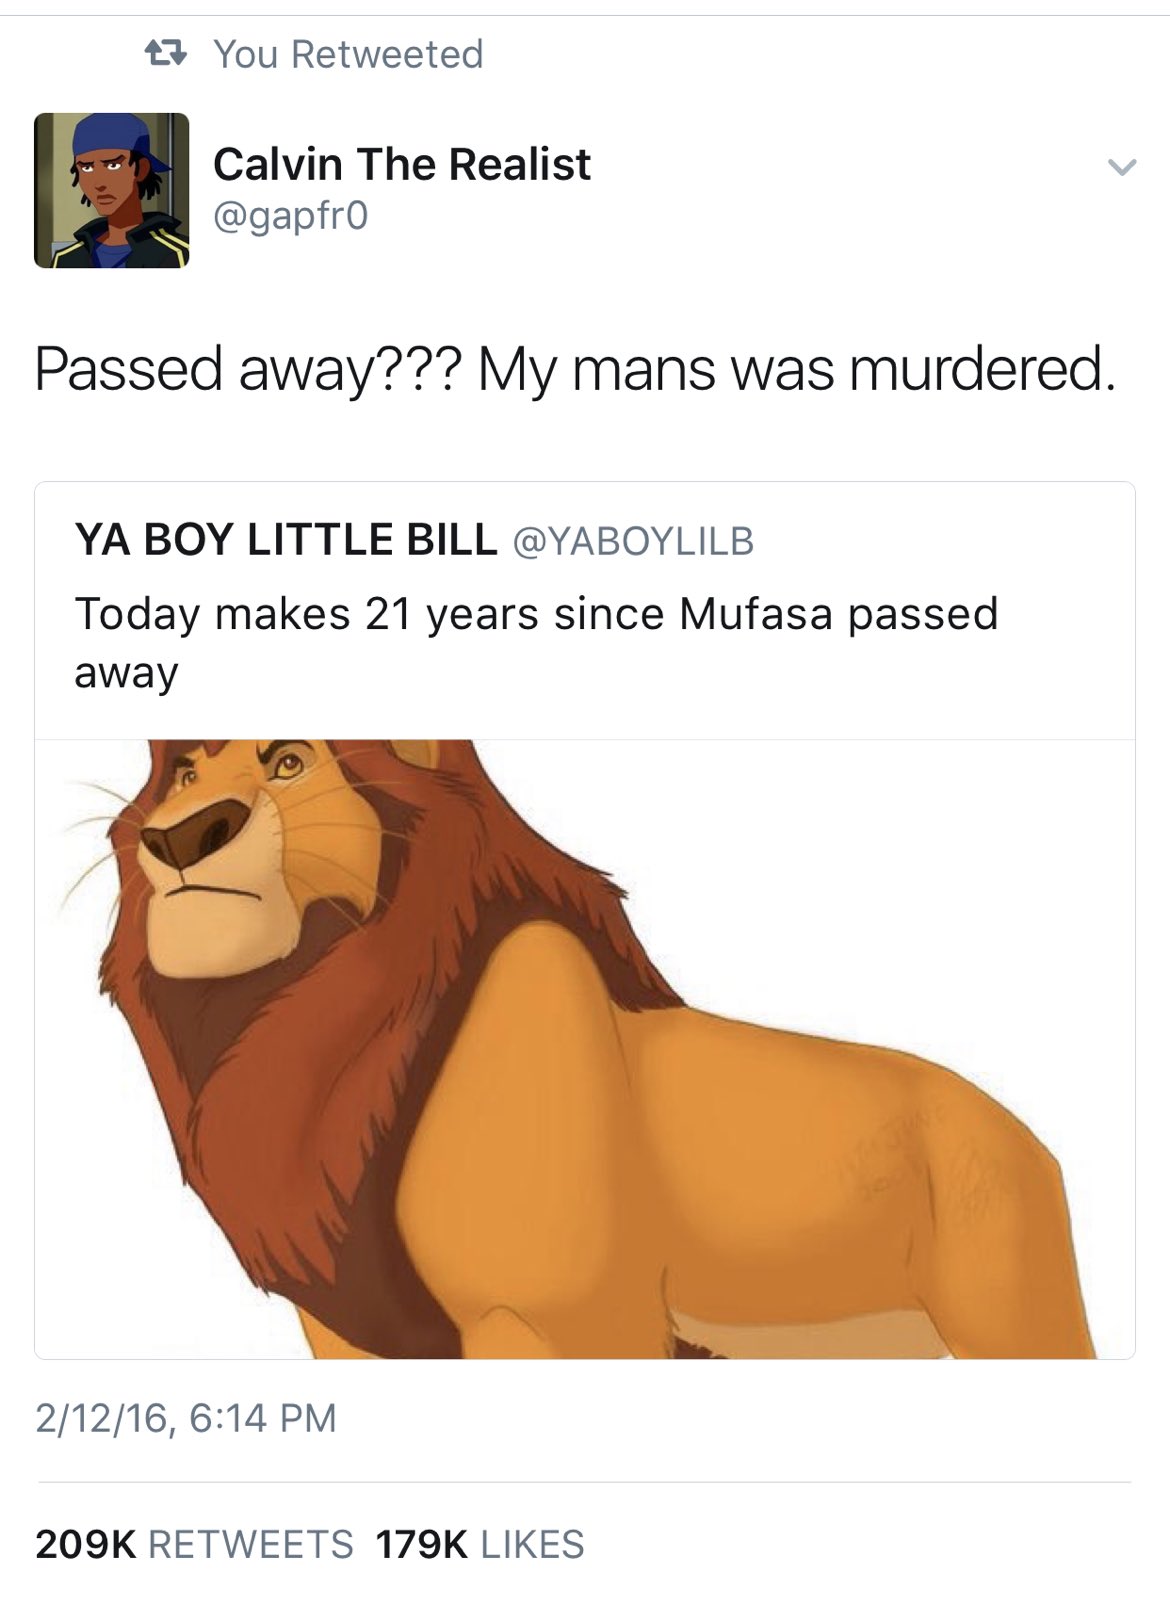 Best Tweets of All Time - lion king mufasa - You Retweeted Calvin The Realist Passed away??? My mans was murdered. Ya Boy Little Bill Today makes 21 years since Mufasa passed away 21216,